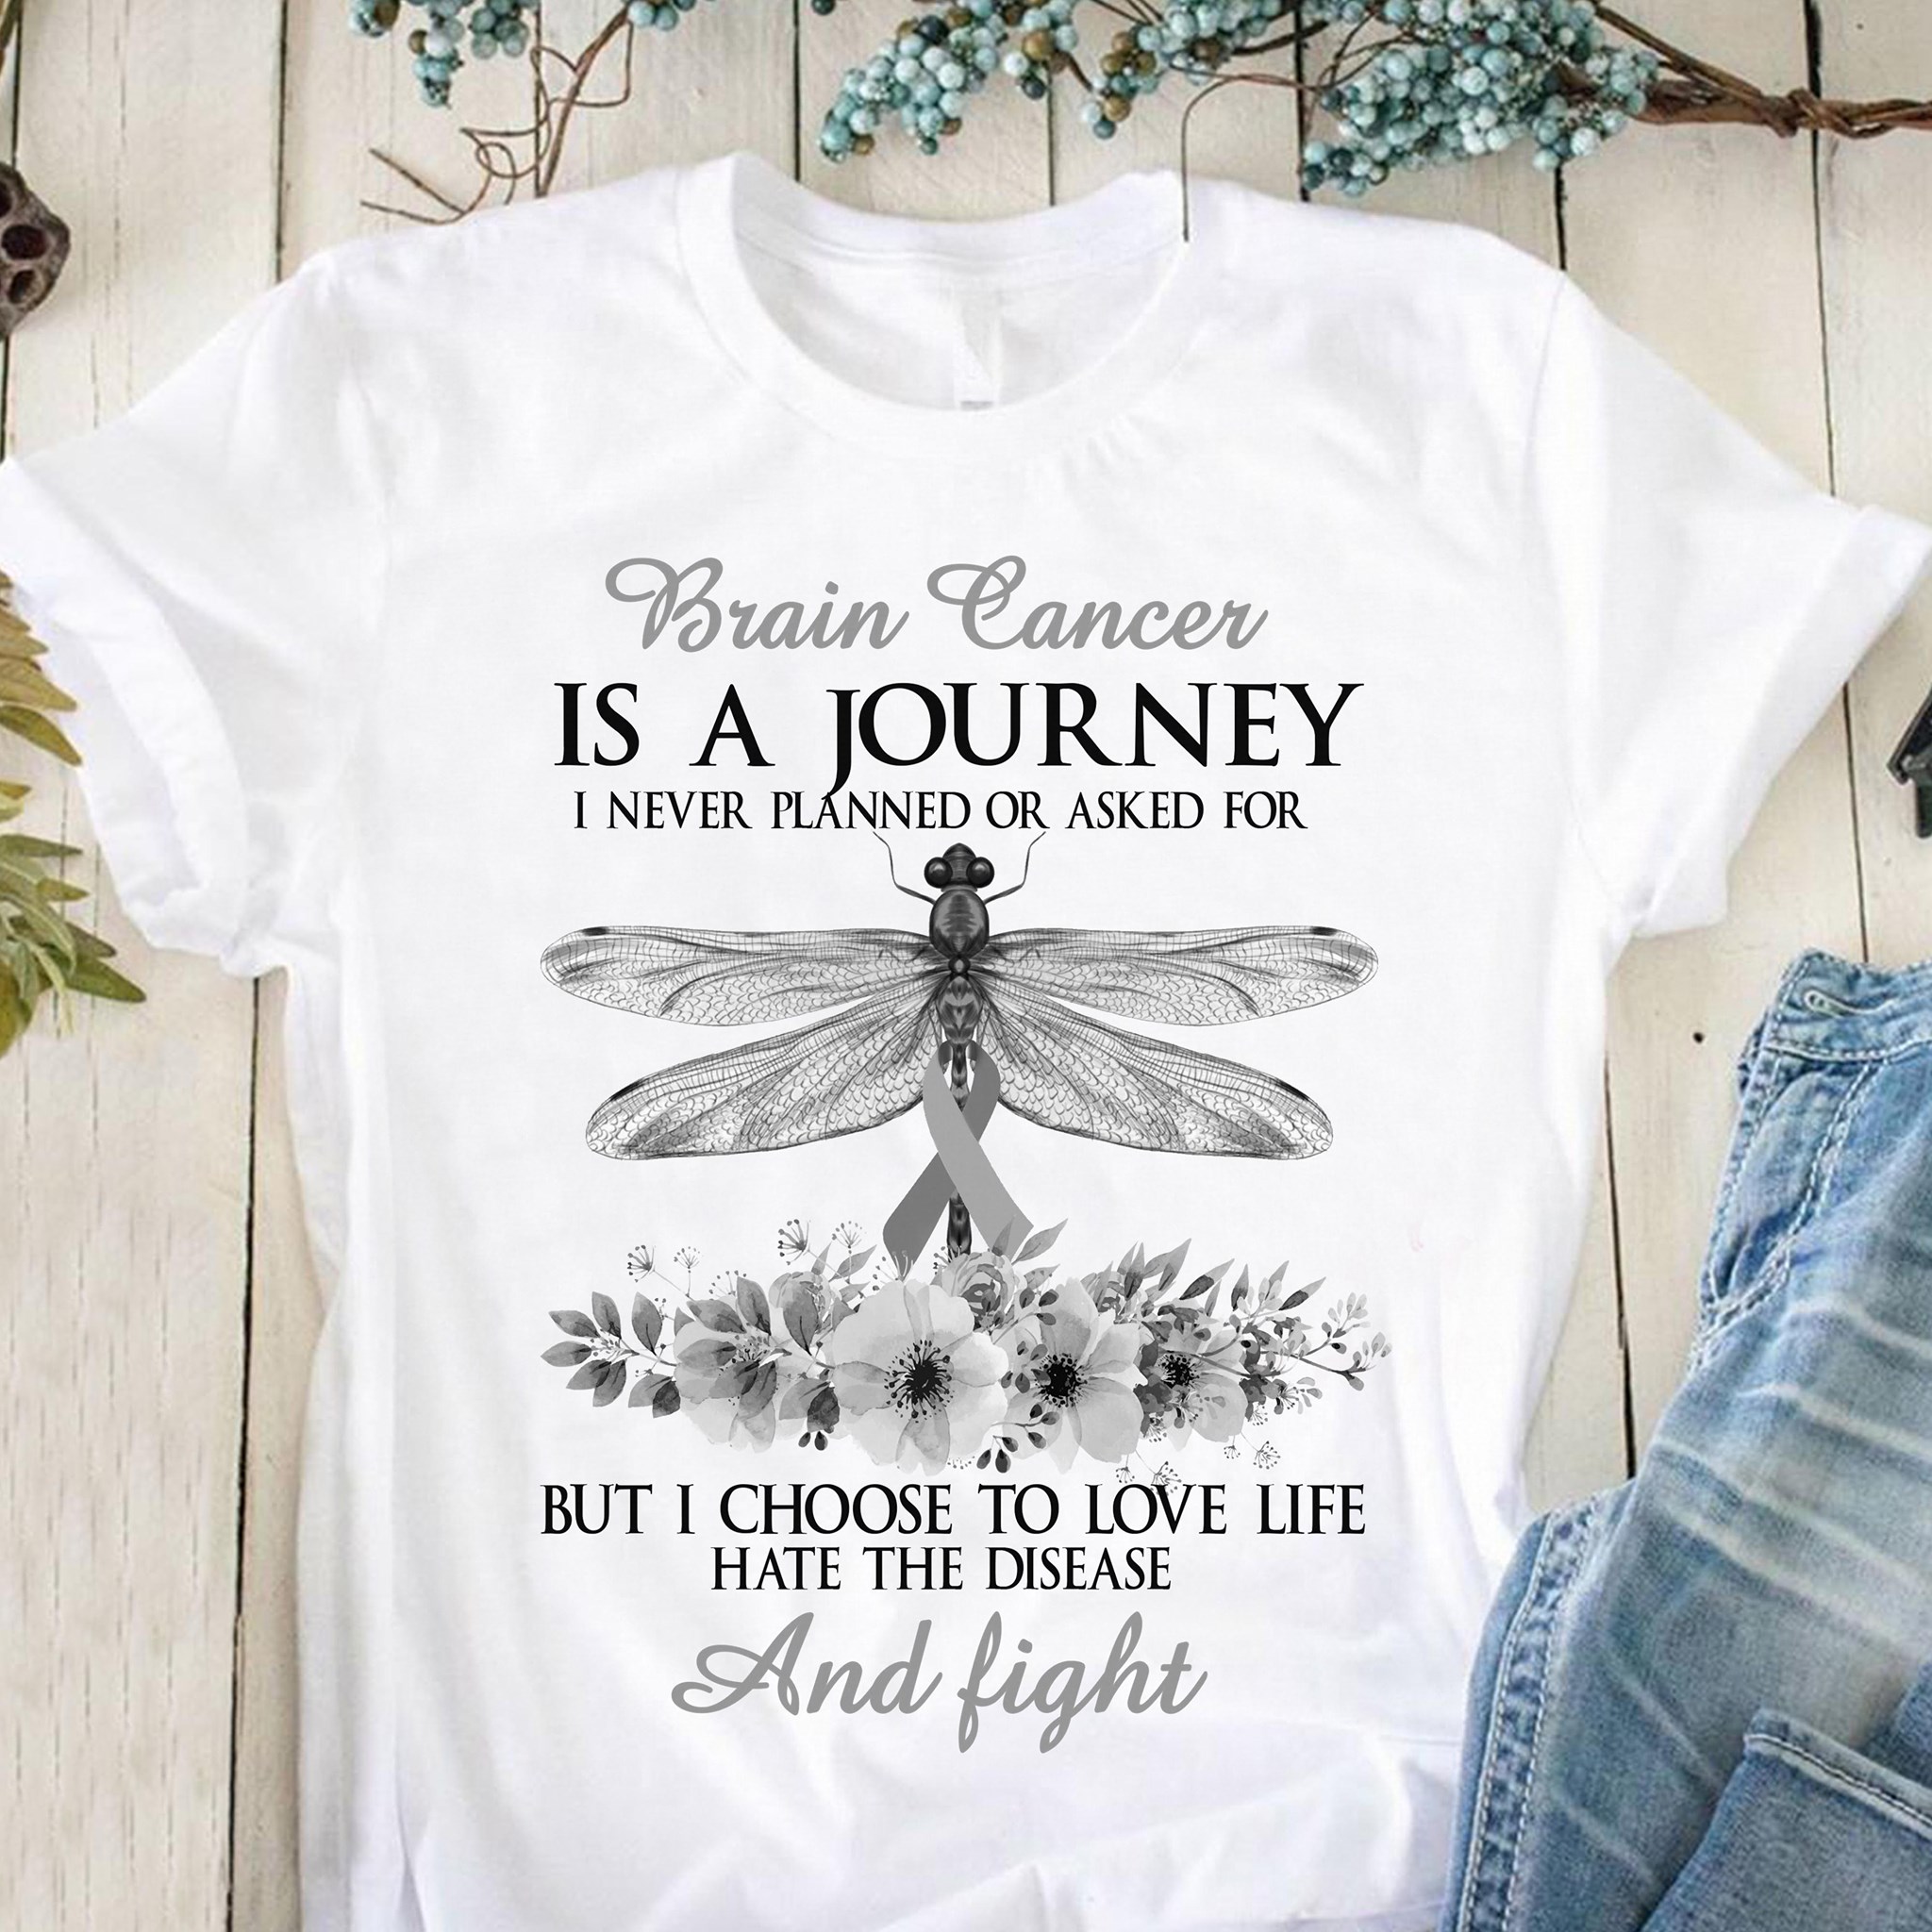 Brain cancer is a journey I never planned or asked for but I choose to love life hate the disease and fight - Dragon fly